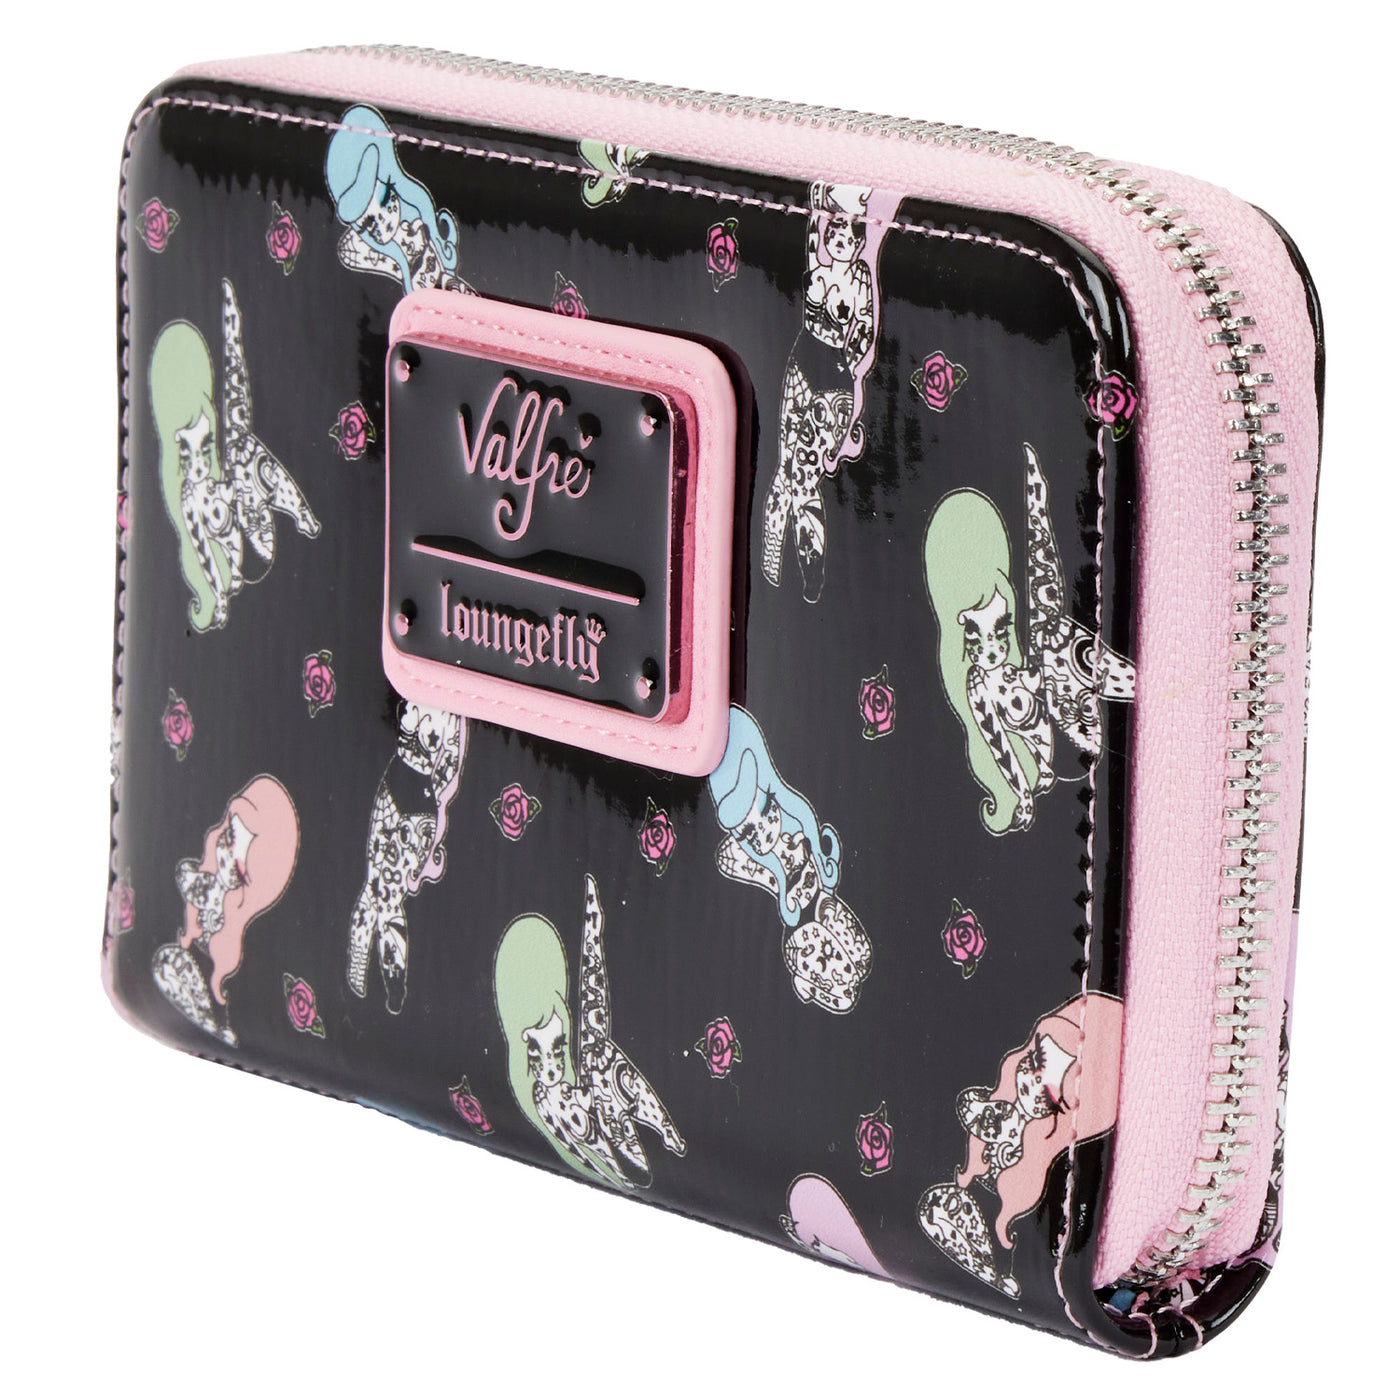 Loungefly Valfre Tattoo AOP Wallet